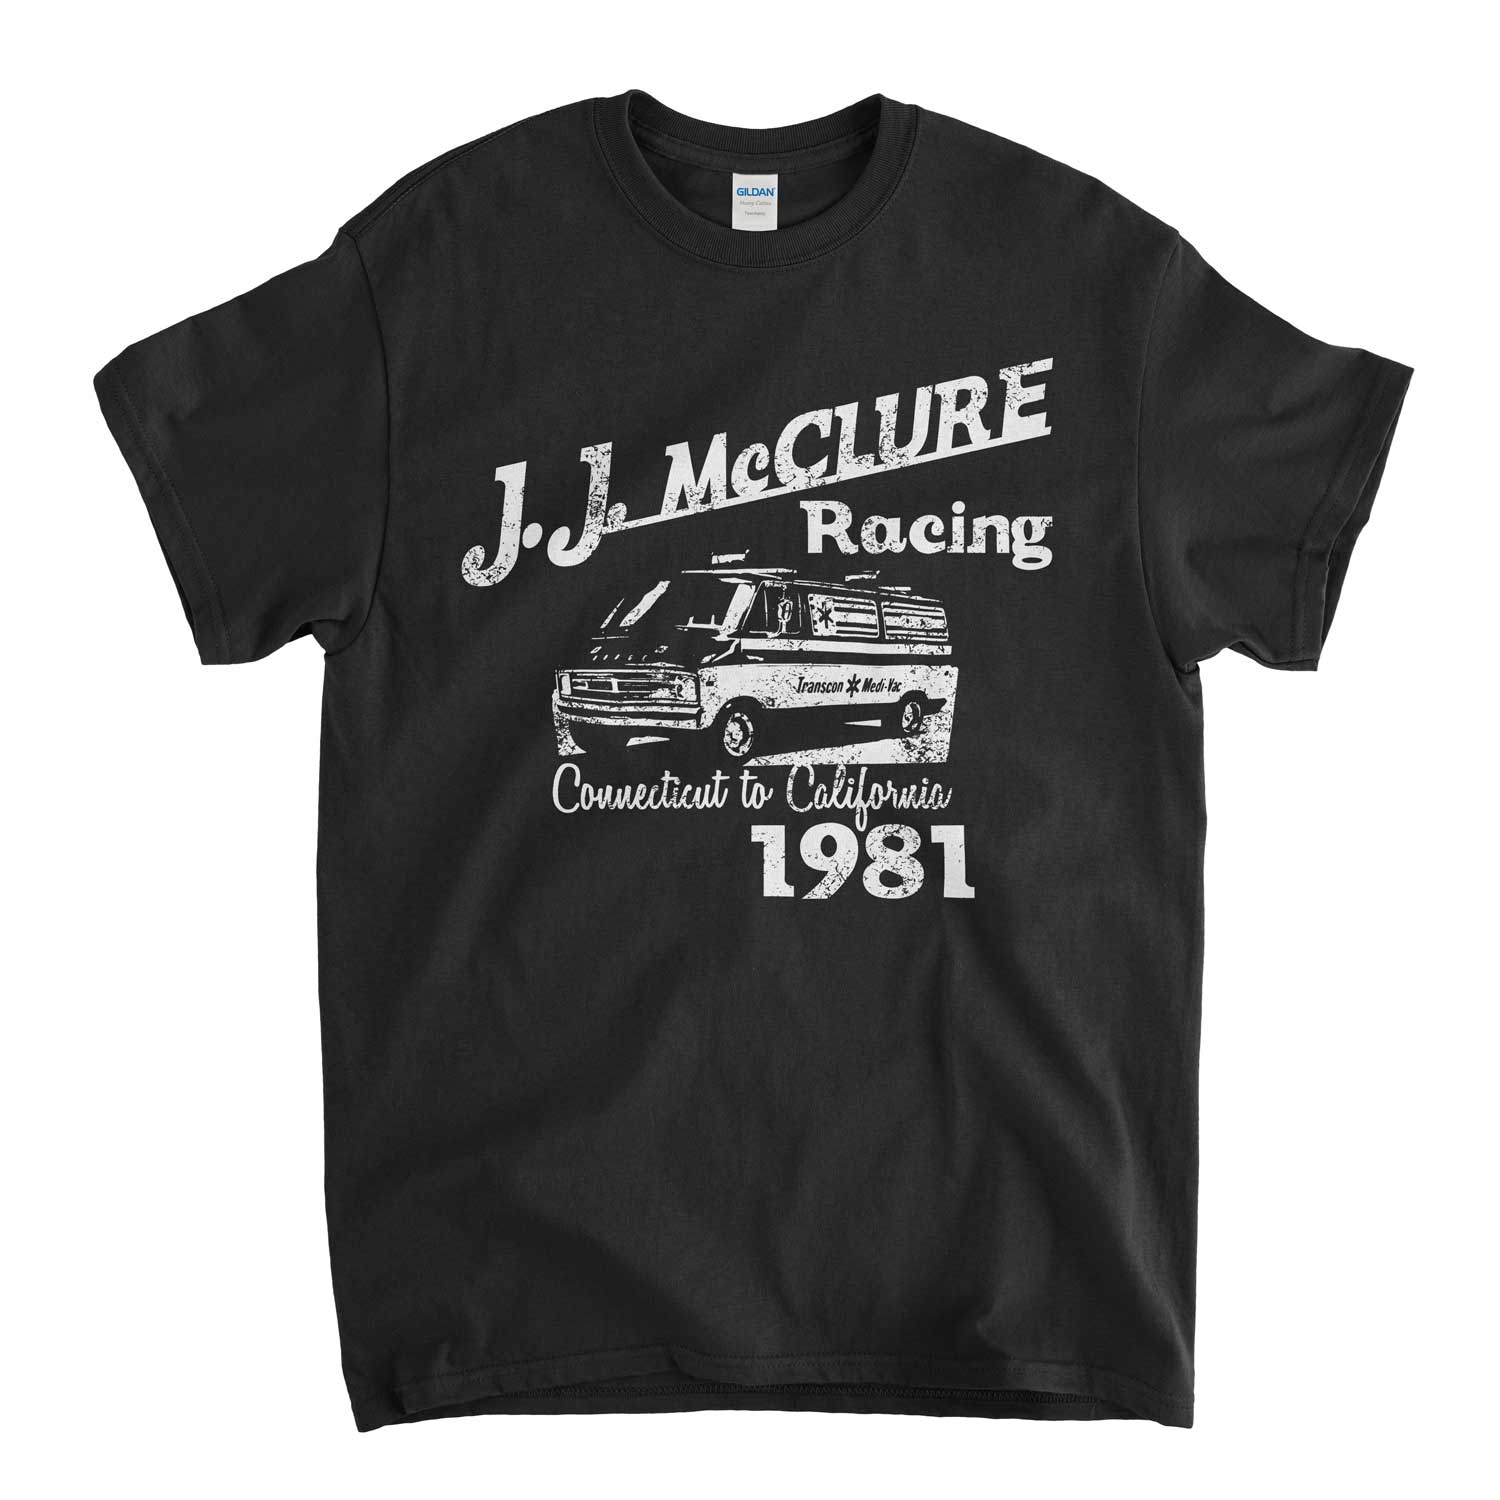 Inspired by The Cannonball Run T Shirt - J.J. McClure Racing